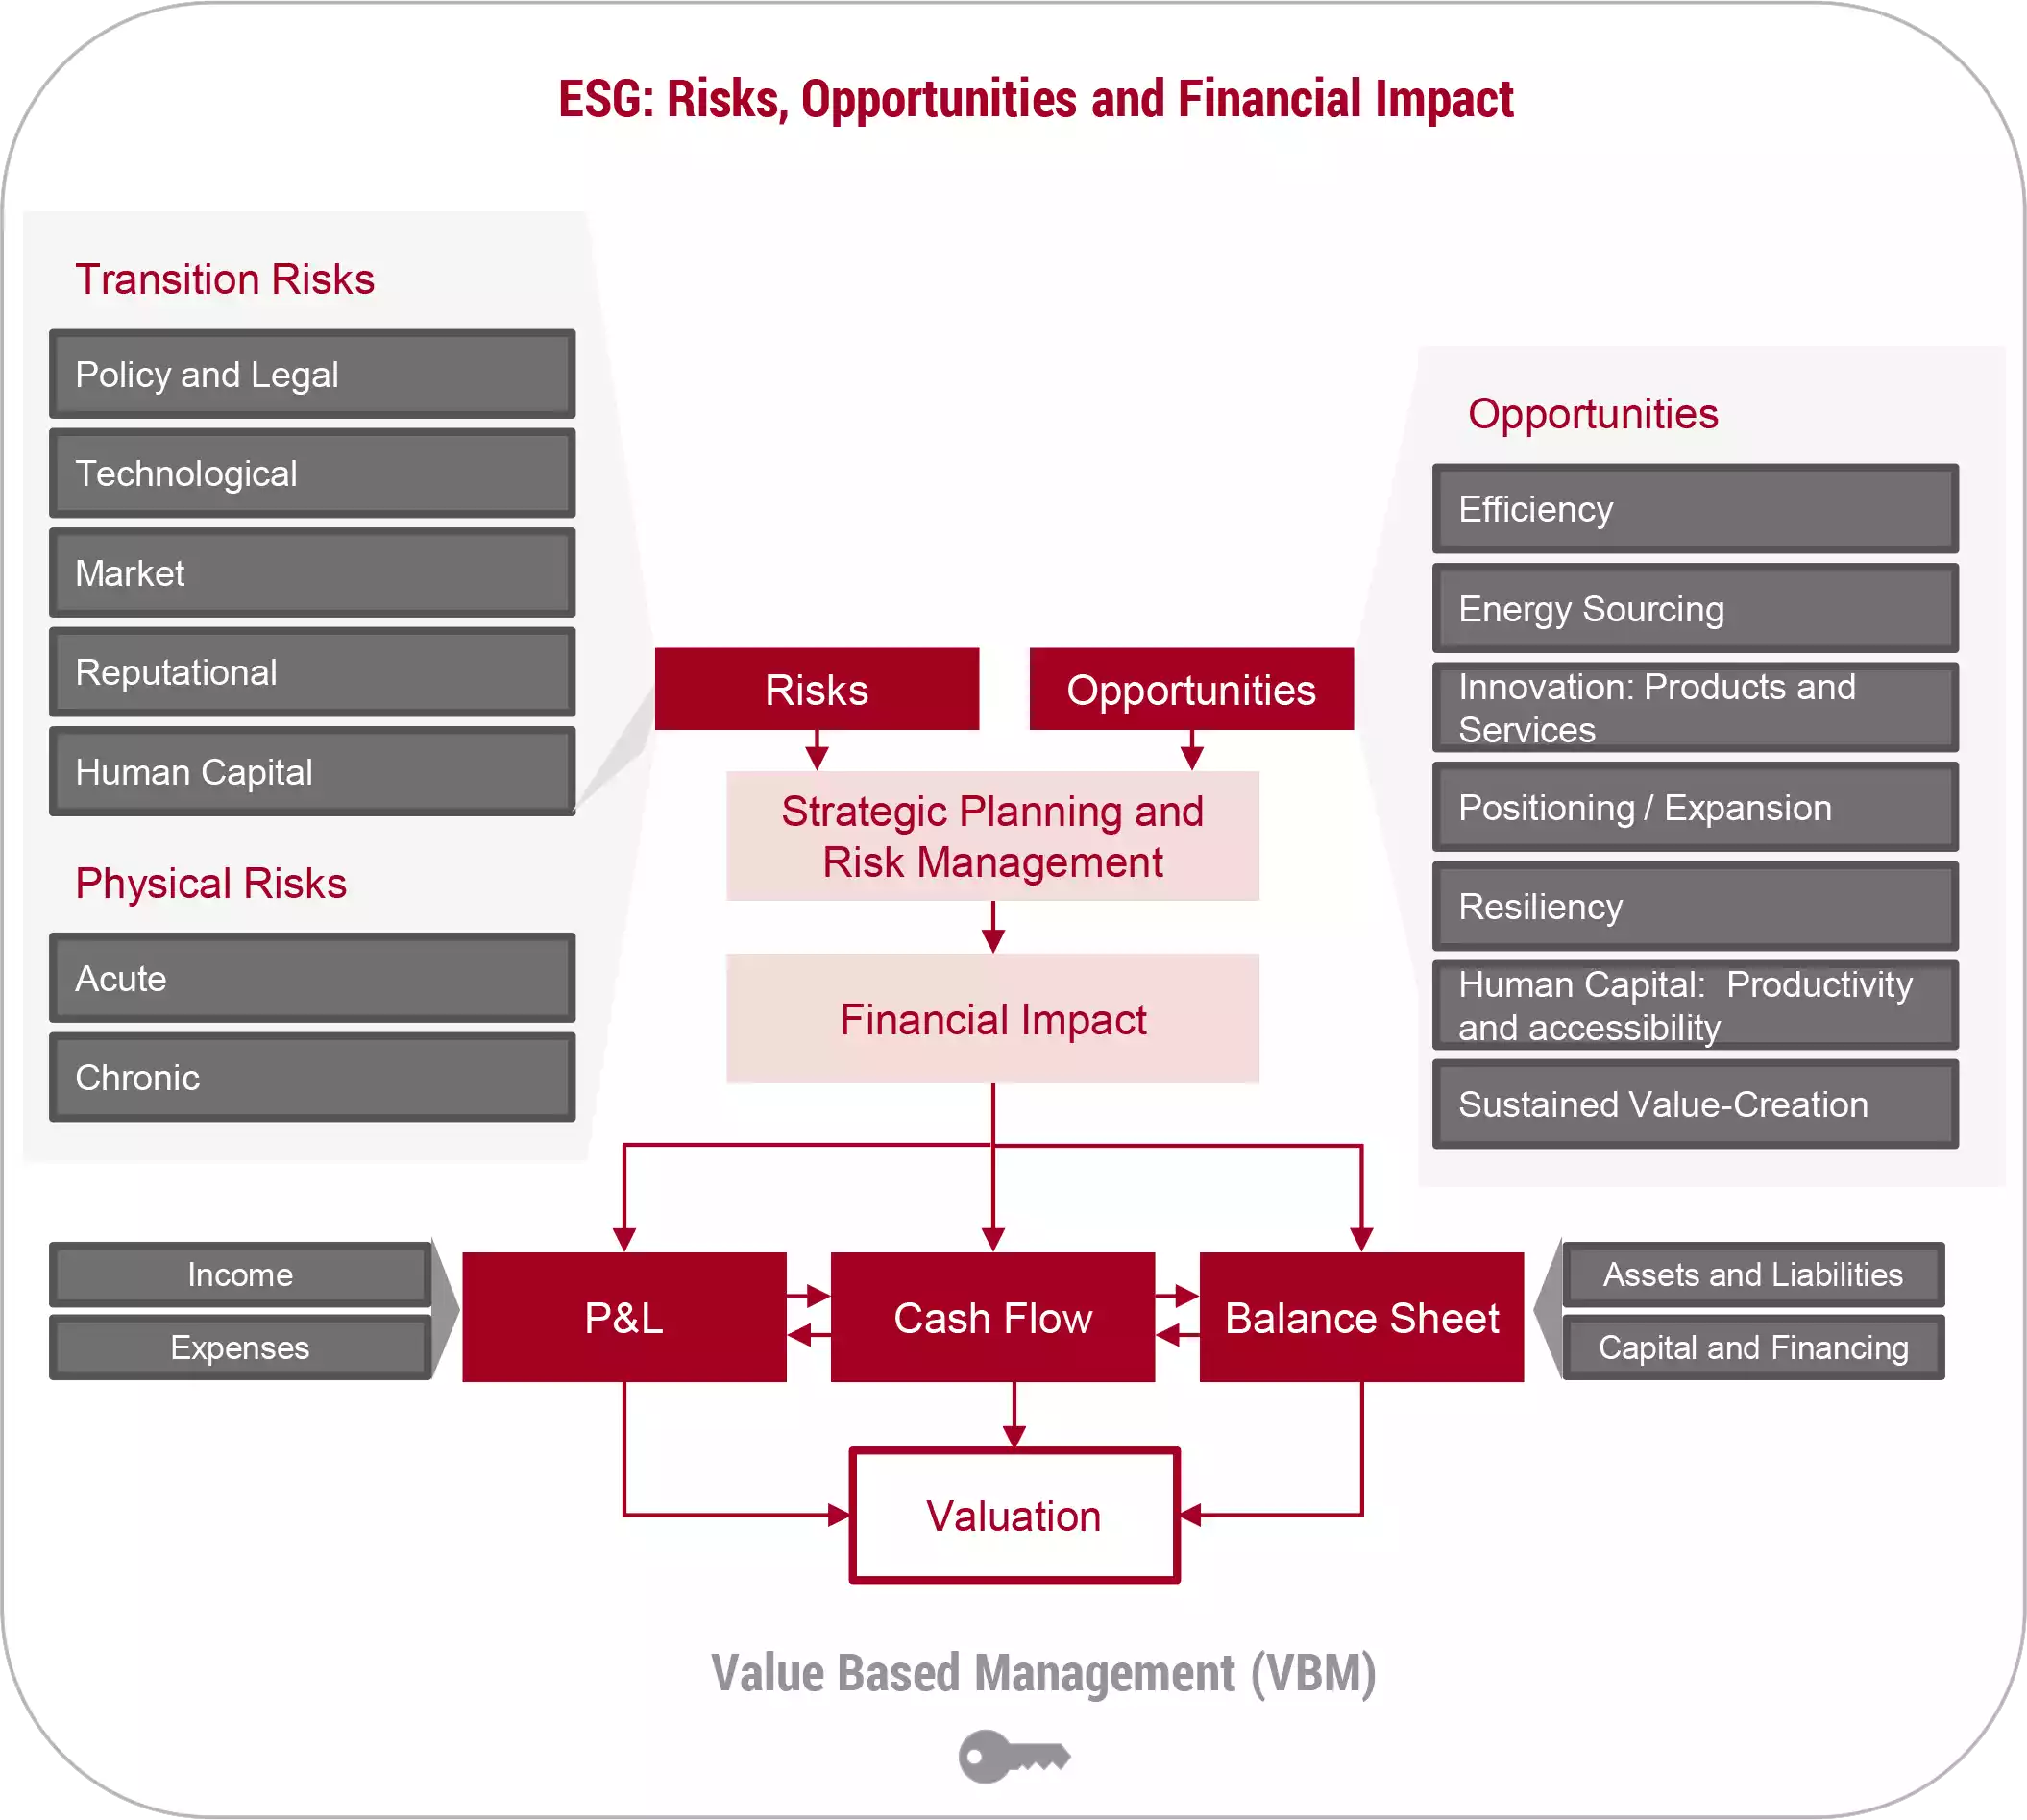 ESG Risks, Opportunities and Financial Impact Flow Chart